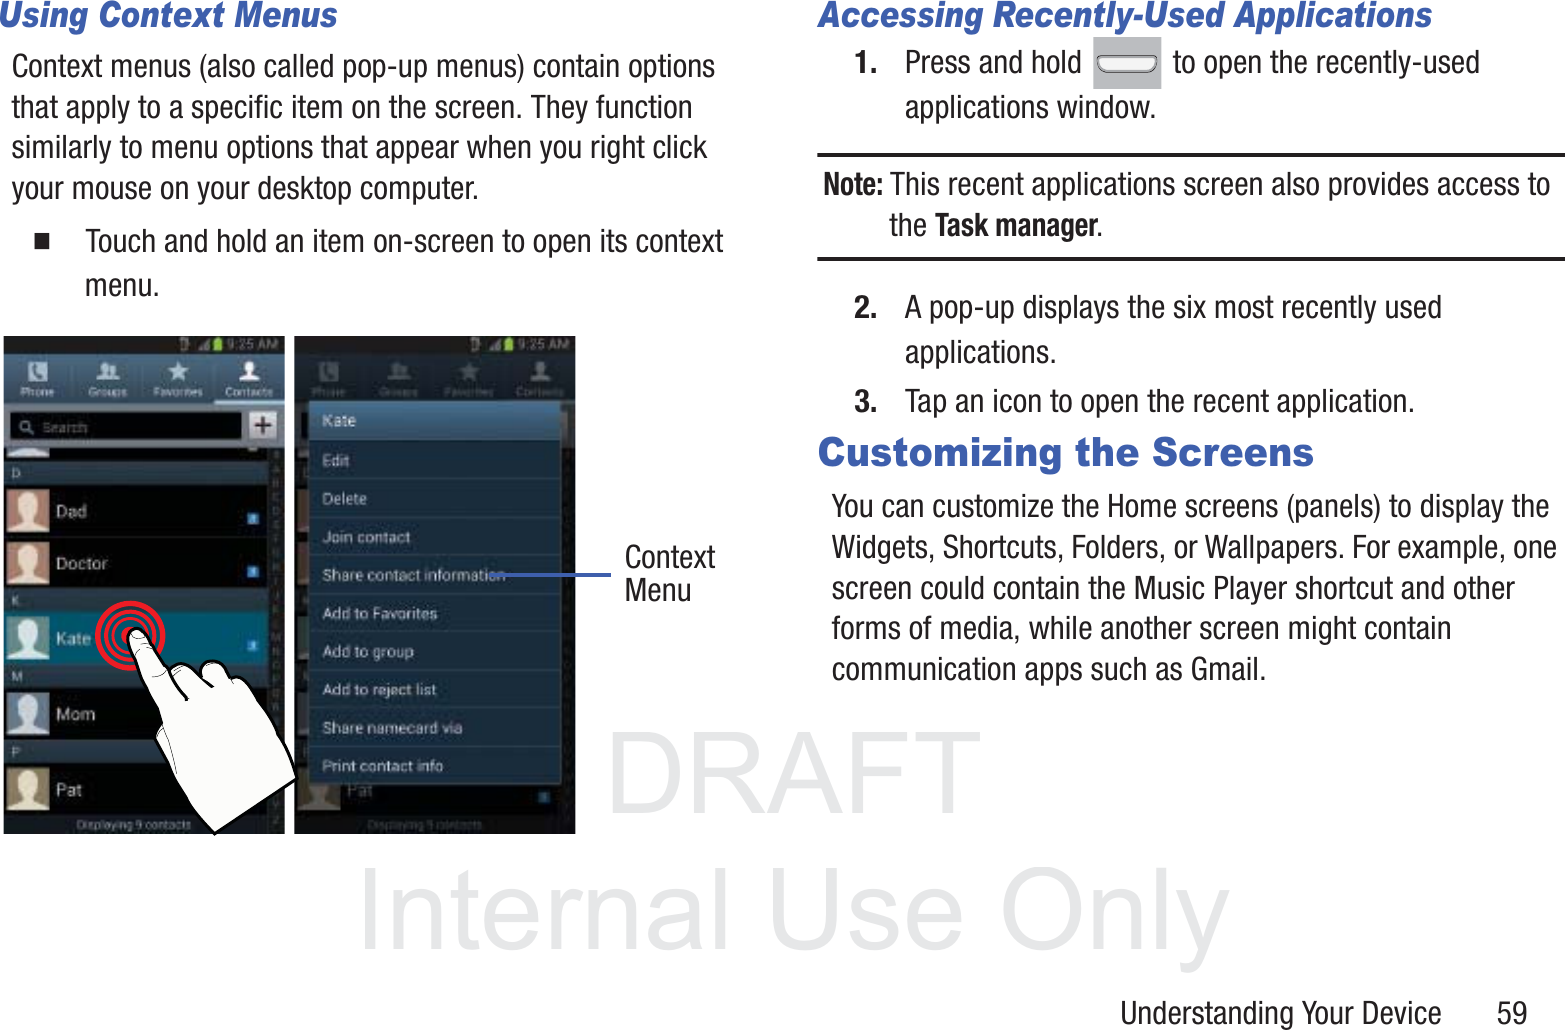 DRAFT InternalUse OnlyUnderstanding Your Device       59Using Context MenusContext menus (also called pop-up menus) contain options that apply to a specific item on the screen. They function similarly to menu options that appear when you right click your mouse on your desktop computer.䡲  Touch and hold an item on-screen to open its context menu.    Accessing Recently-Used Applications1. Press and hold   to open the recently-used applications window.Note: This recent applications screen also provides access to the Task manager.2. A pop-up displays the six most recently used applications.3. Tap an icon to open the recent application.Customizing the ScreensYou can customize the Home screens (panels) to display the Widgets, Shortcuts, Folders, or Wallpapers. For example, one screen could contain the Music Player shortcut and other forms of media, while another screen might contain communication apps such as Gmail.ContextMenu